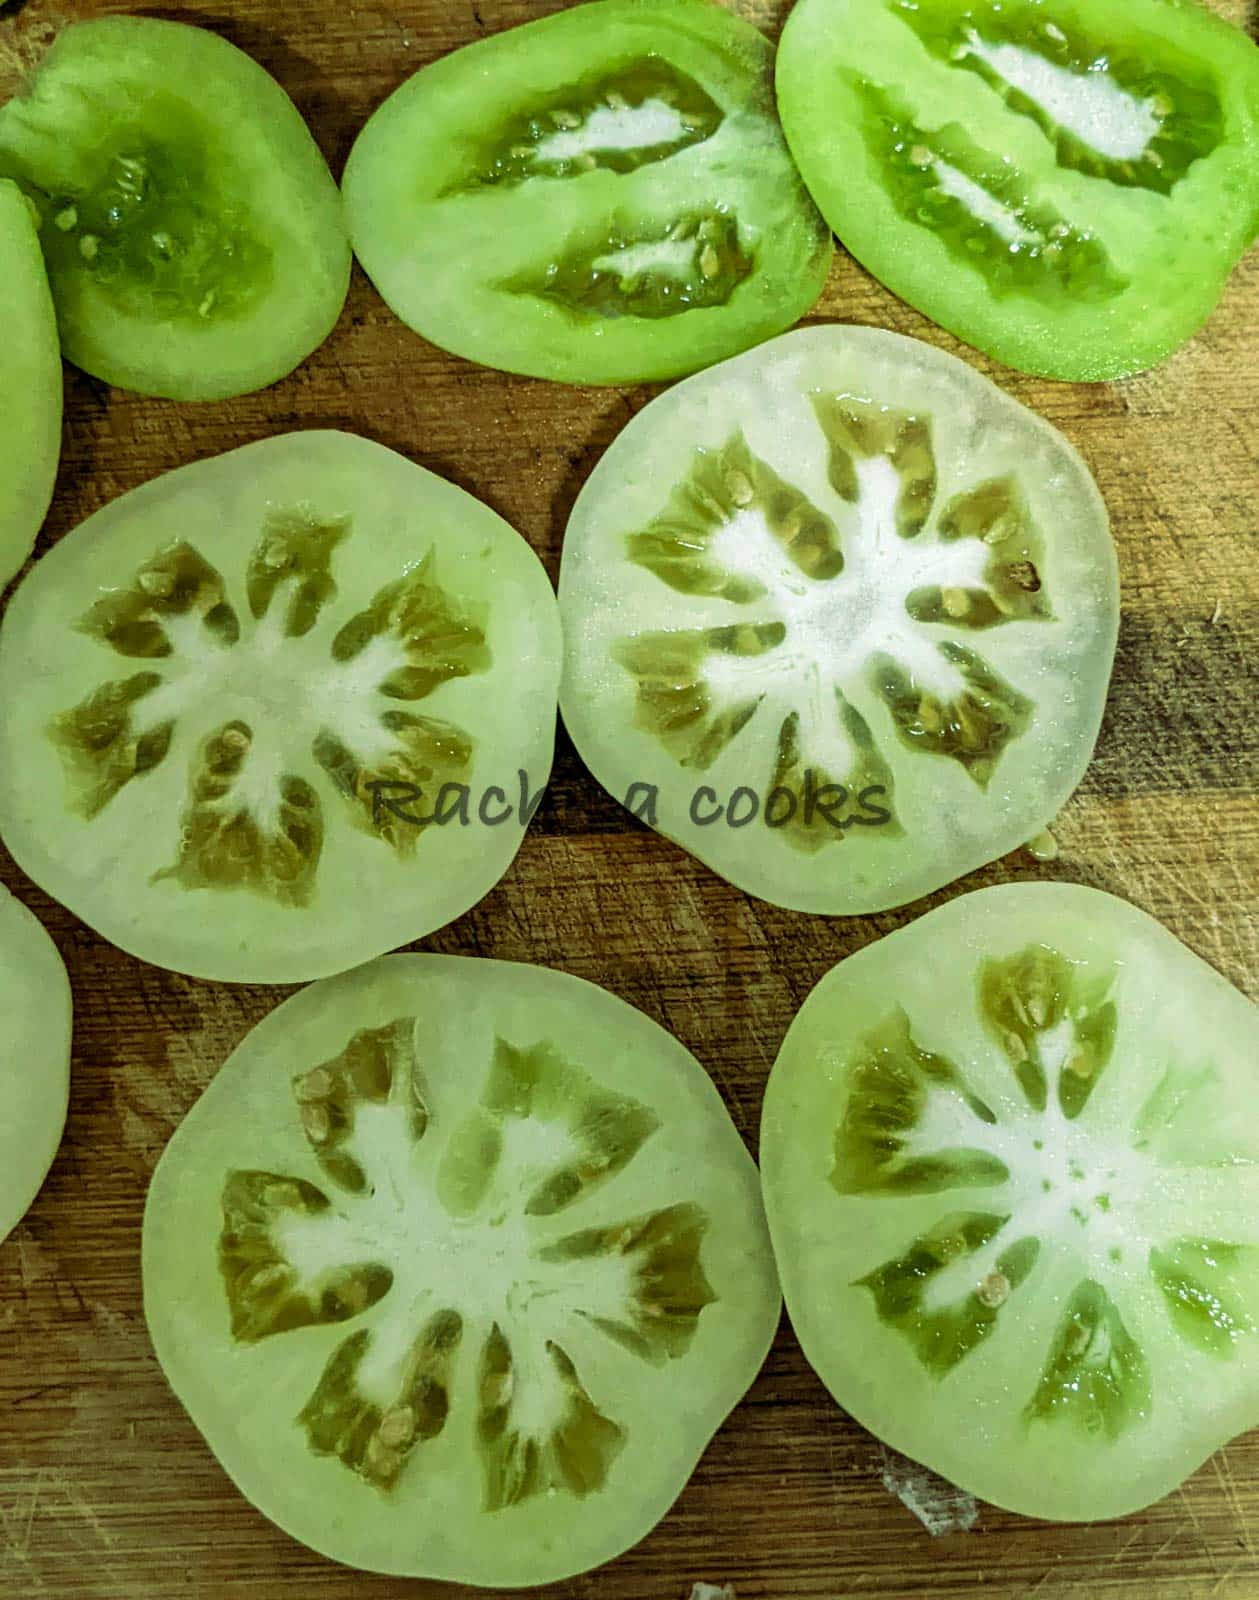 Green tomatoes cut into slices